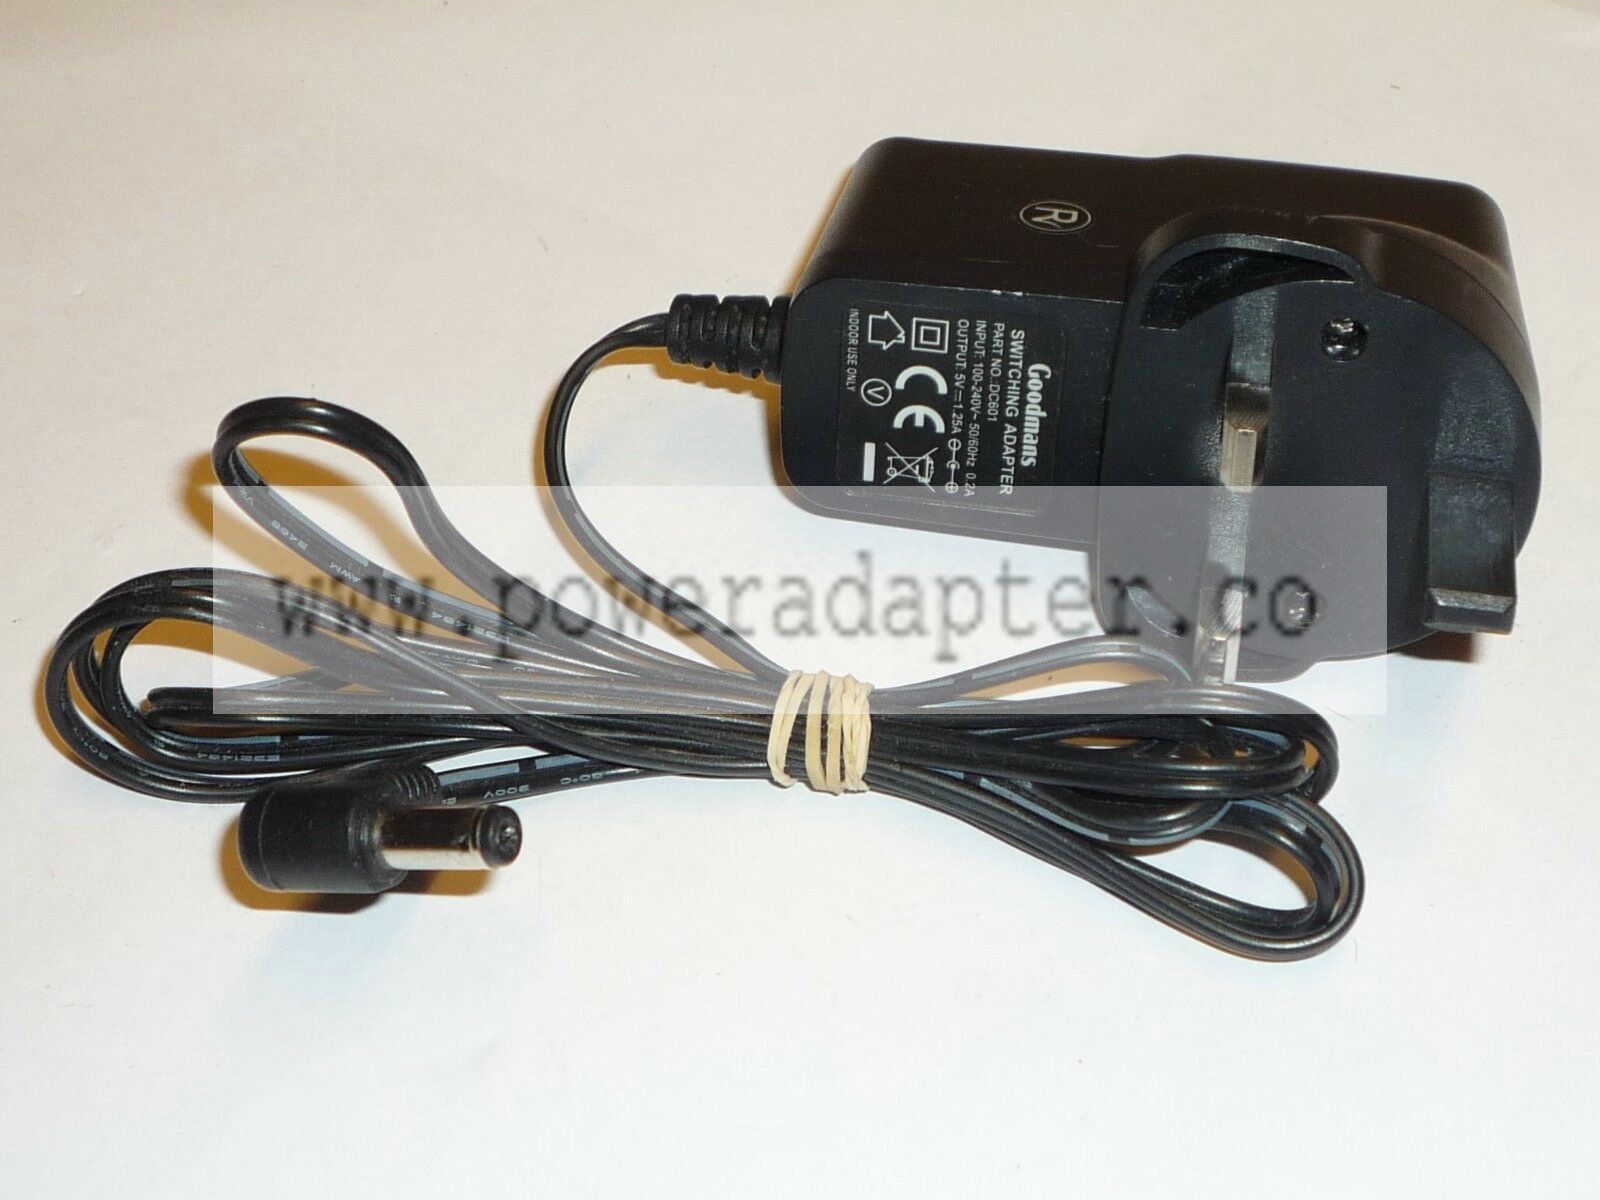 GENUINE GOODMANS ADAPTER POWER SUPPLY ADAPTOR 5V 1.25A DC601 output: 5v 1.25A DC one year warranty and 30days mon